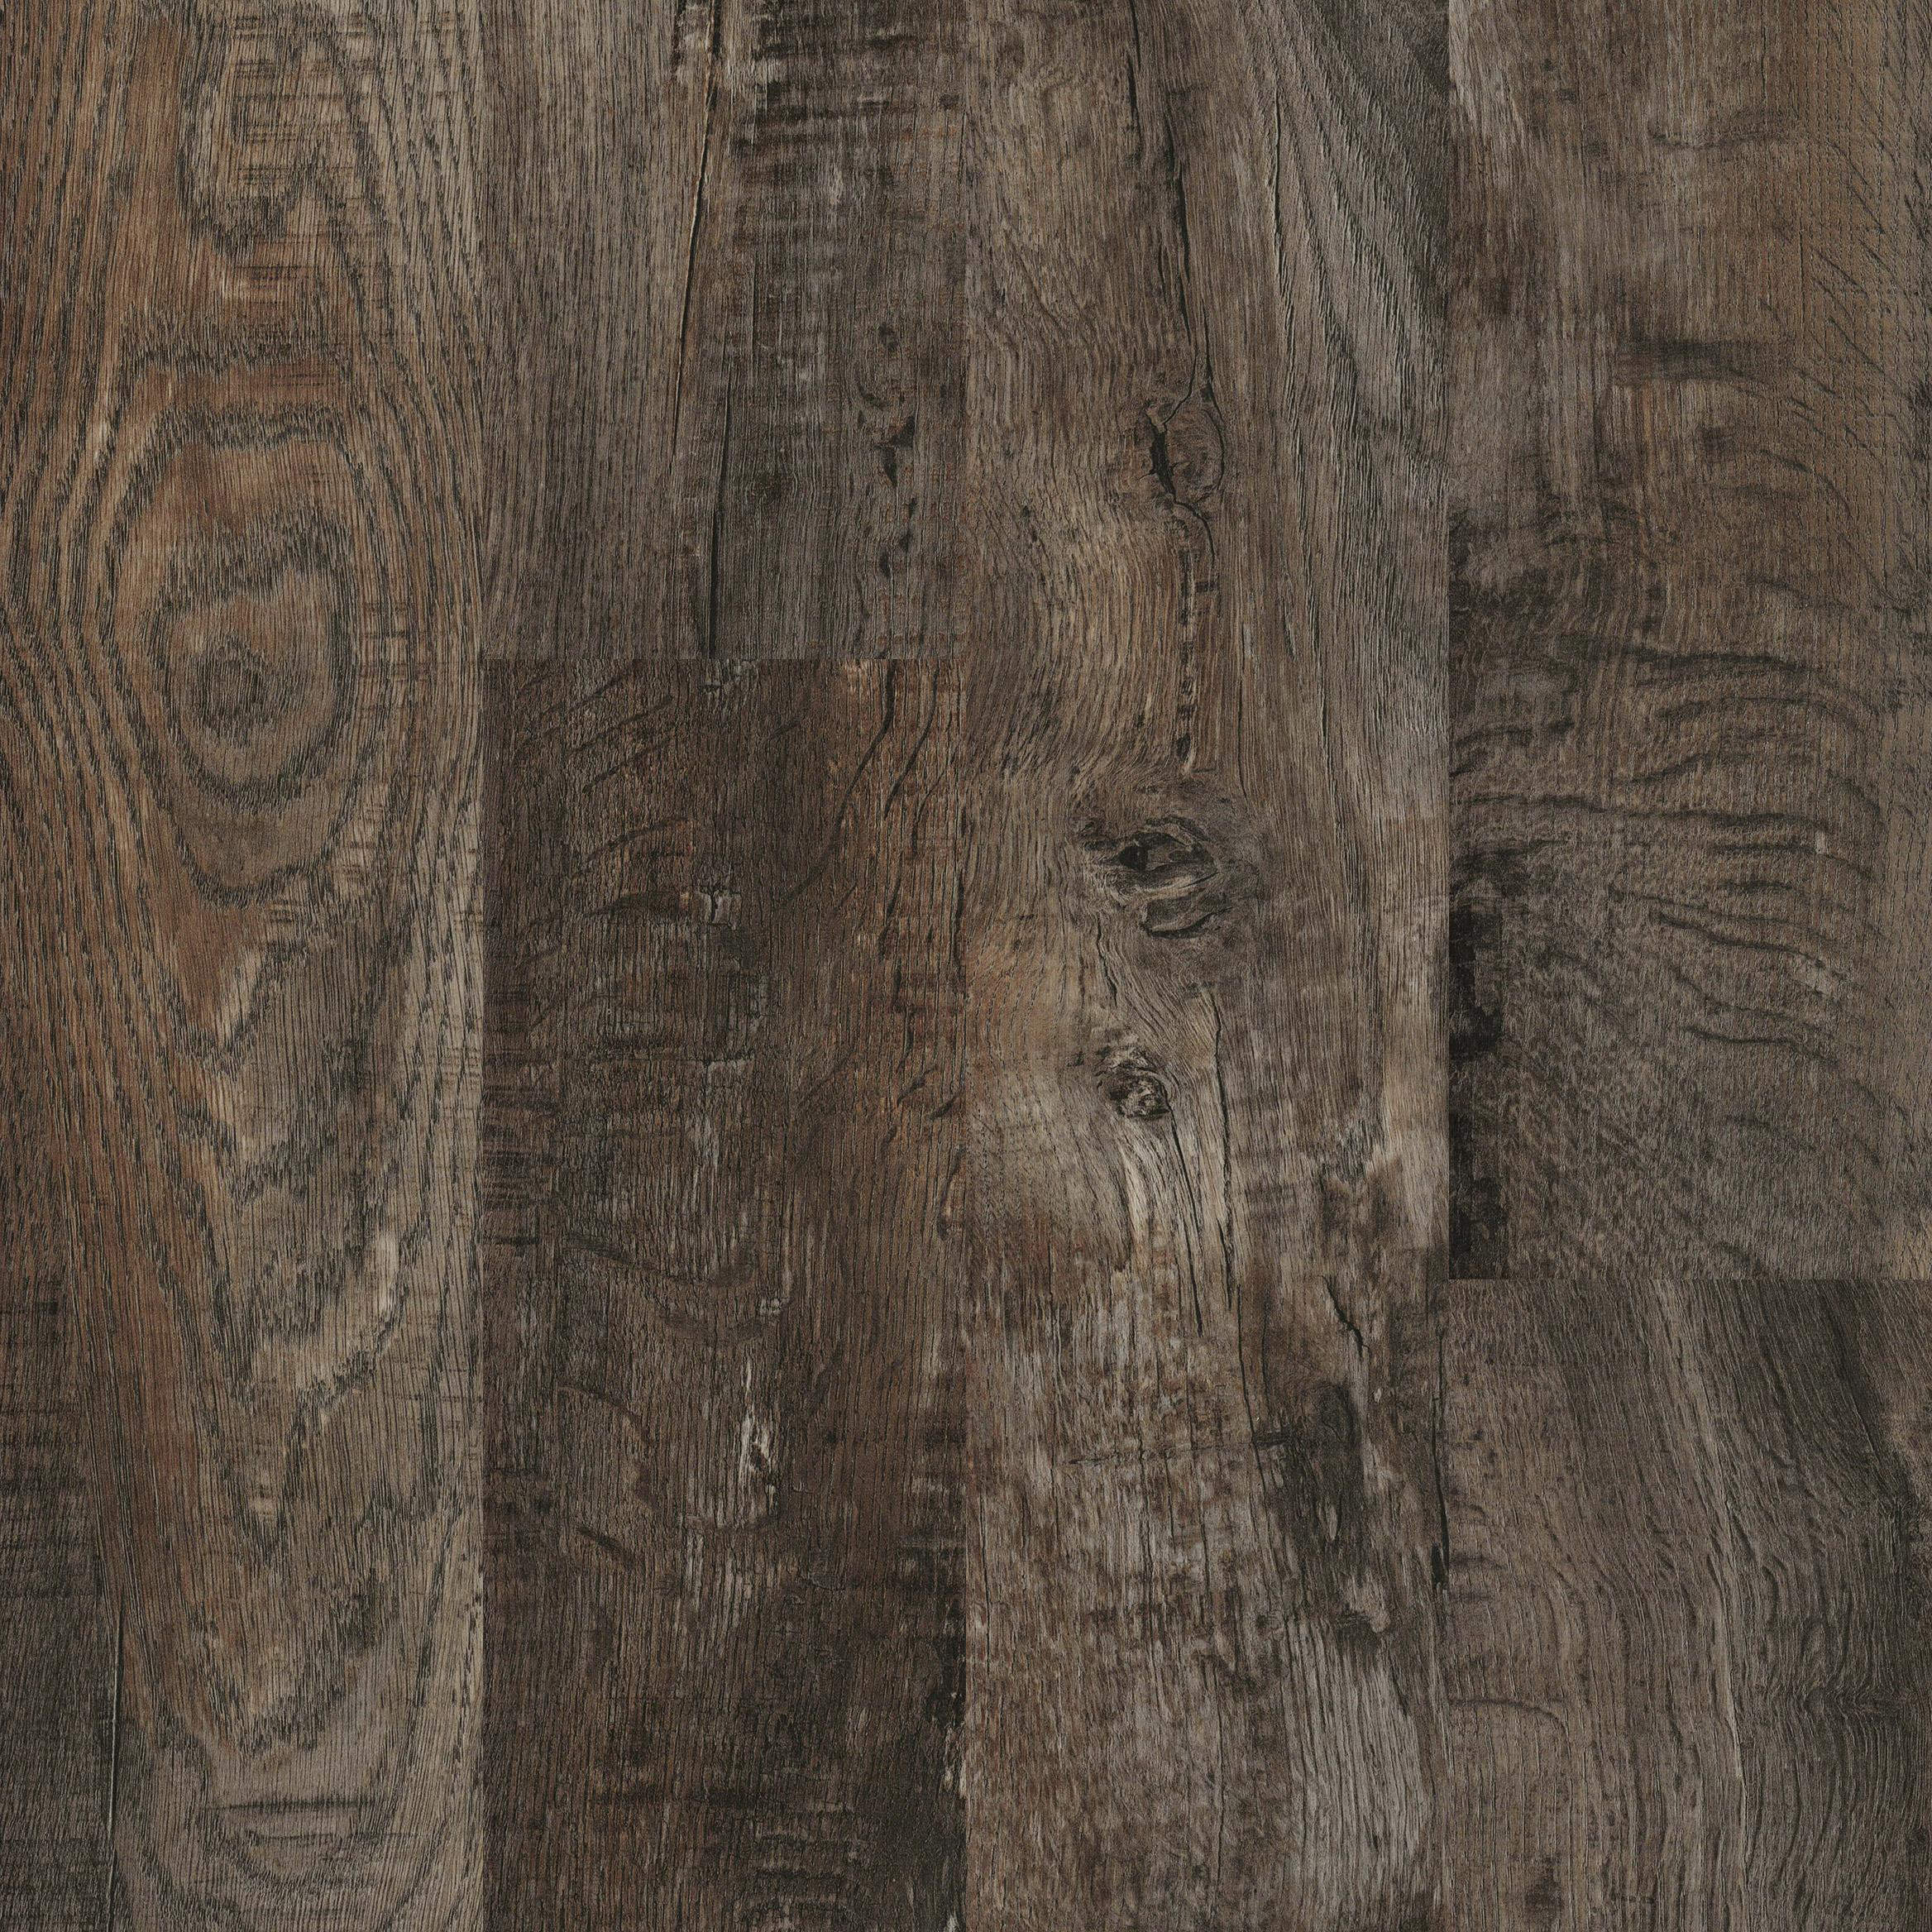 12 Lovable Wide Plank Hardwood Flooring Reviews 2024 free download wide plank hardwood flooring reviews of home expressions hearthstone oak 6 wide luxury vinyl plank flooring pertaining to 360390 5 84 x 35 8 approved